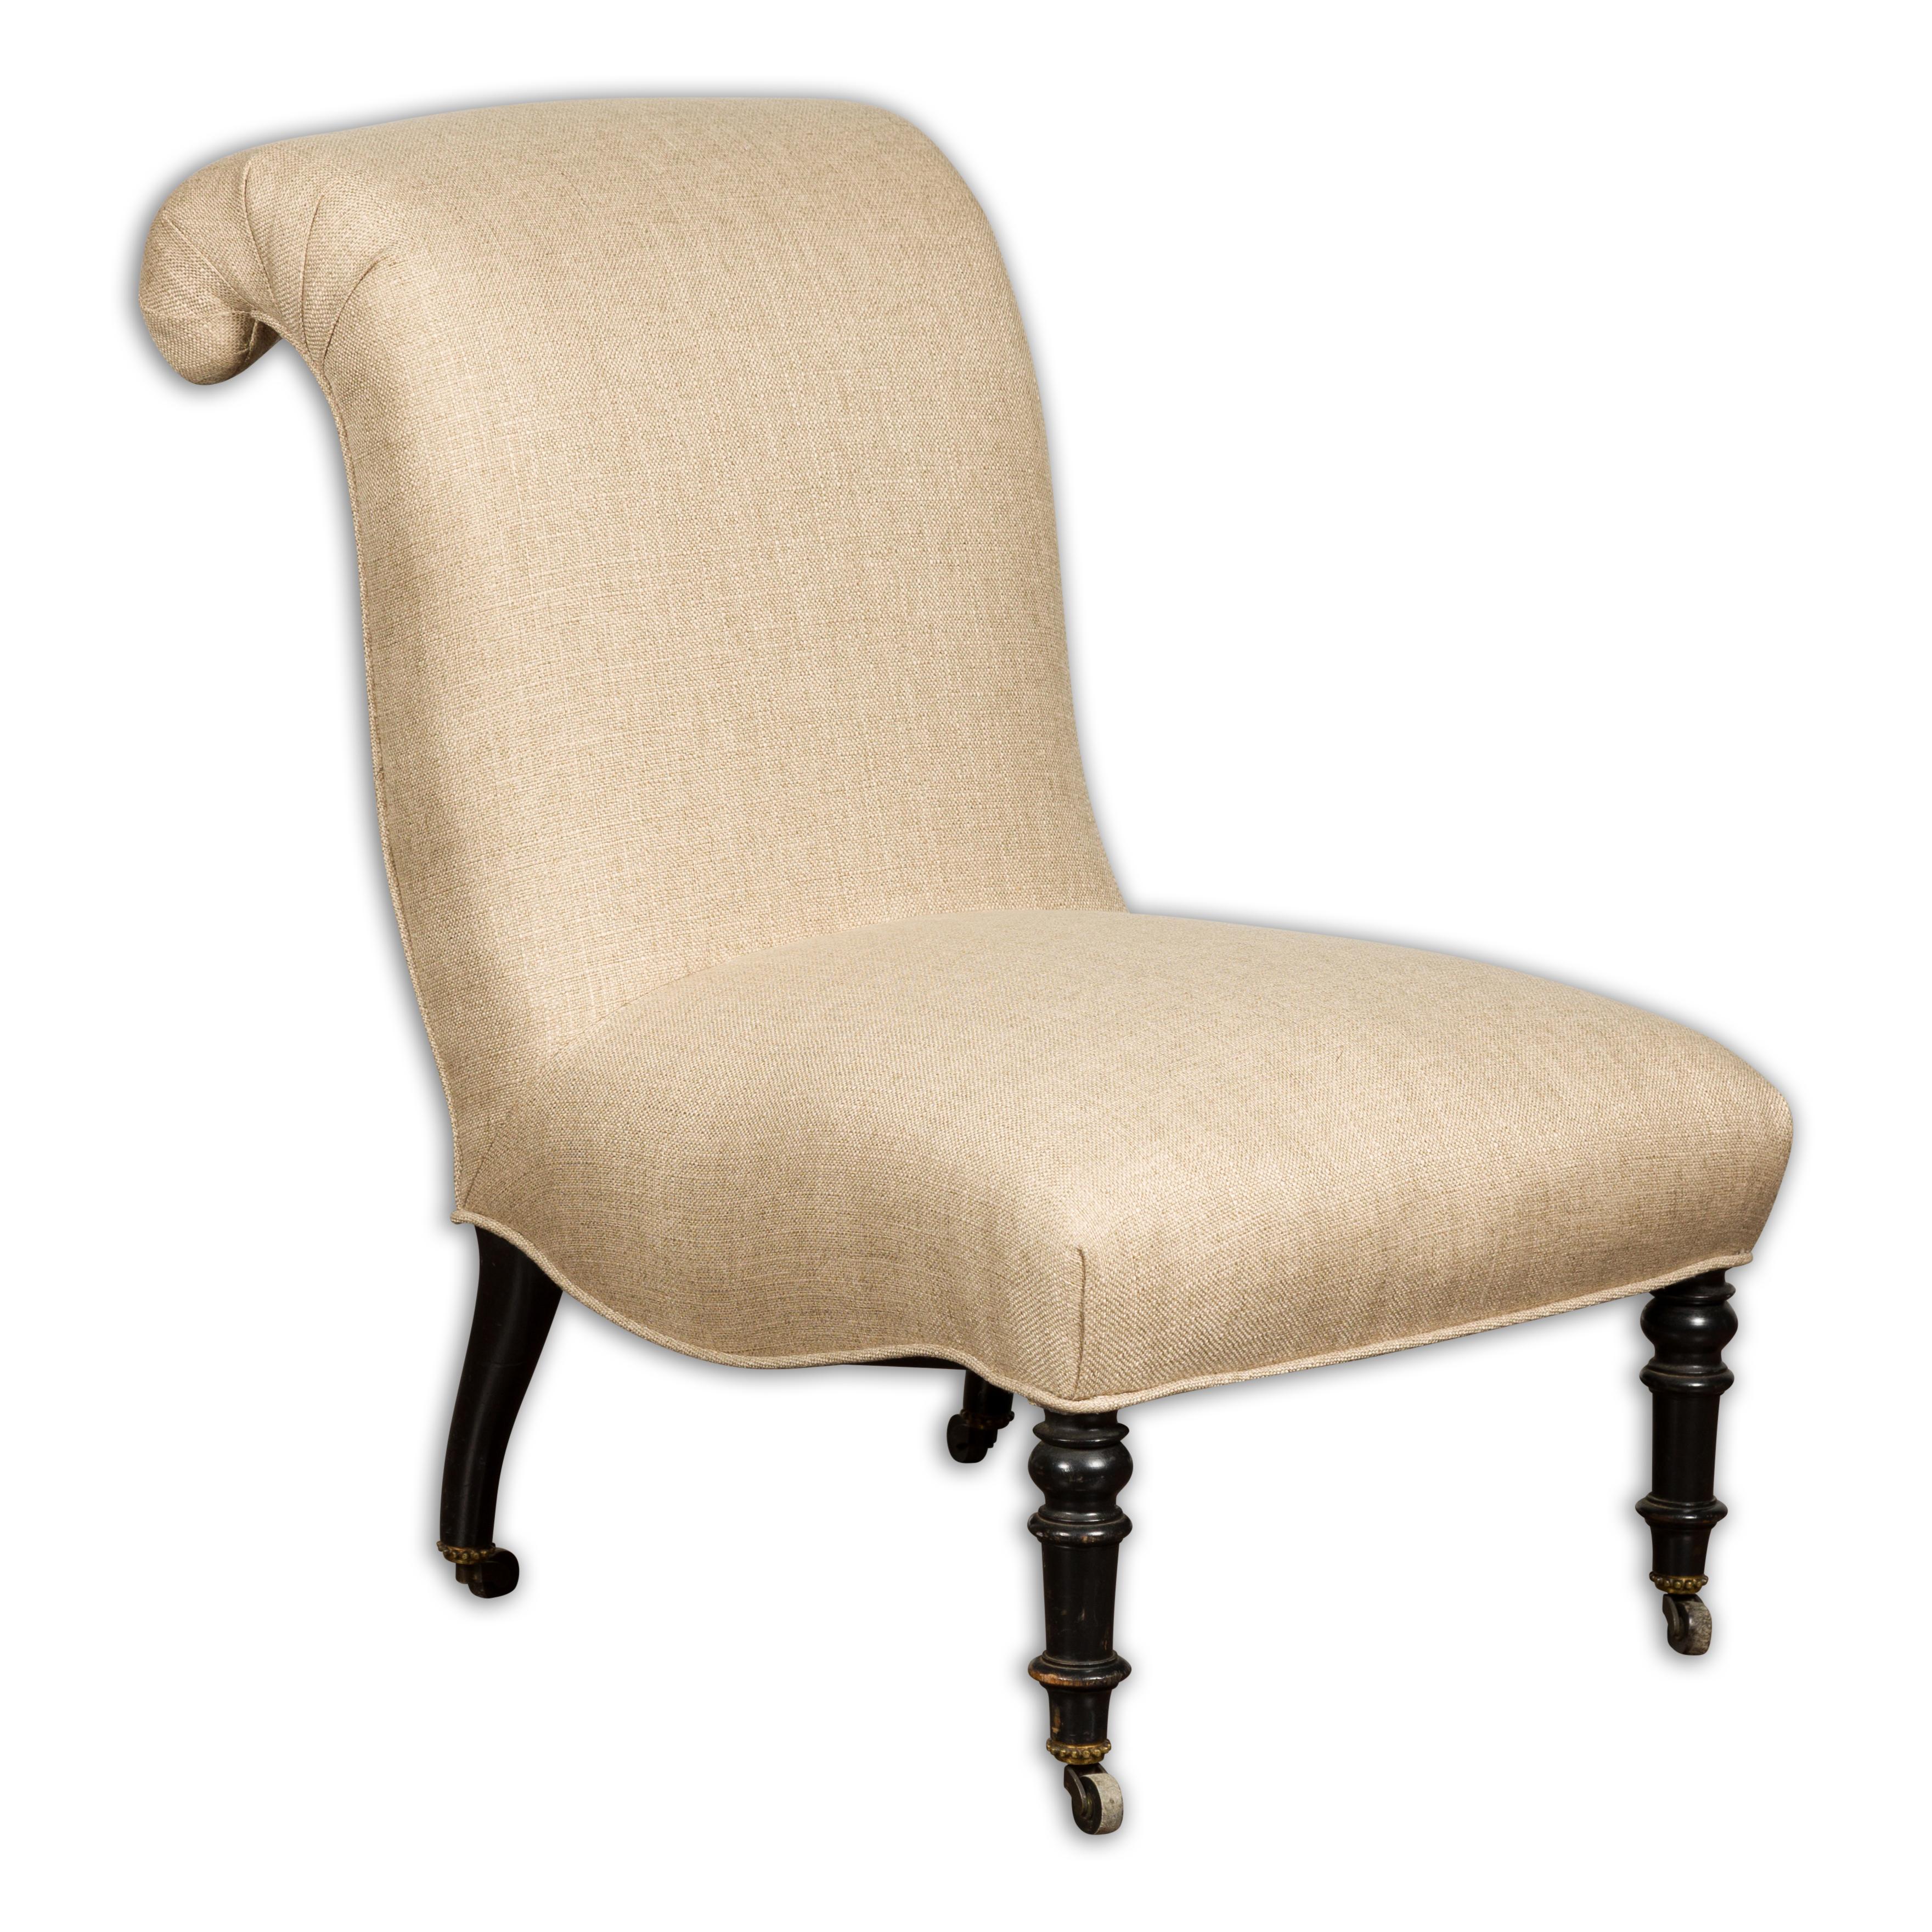 A French Turn of the Century slipper chair circa 1900 with out-scrolling back, turned legs in the front and casters, with newly done linen reupholstery. This French Turn of the Century slipper chair, circa 1900, is an epitome of refined elegance,